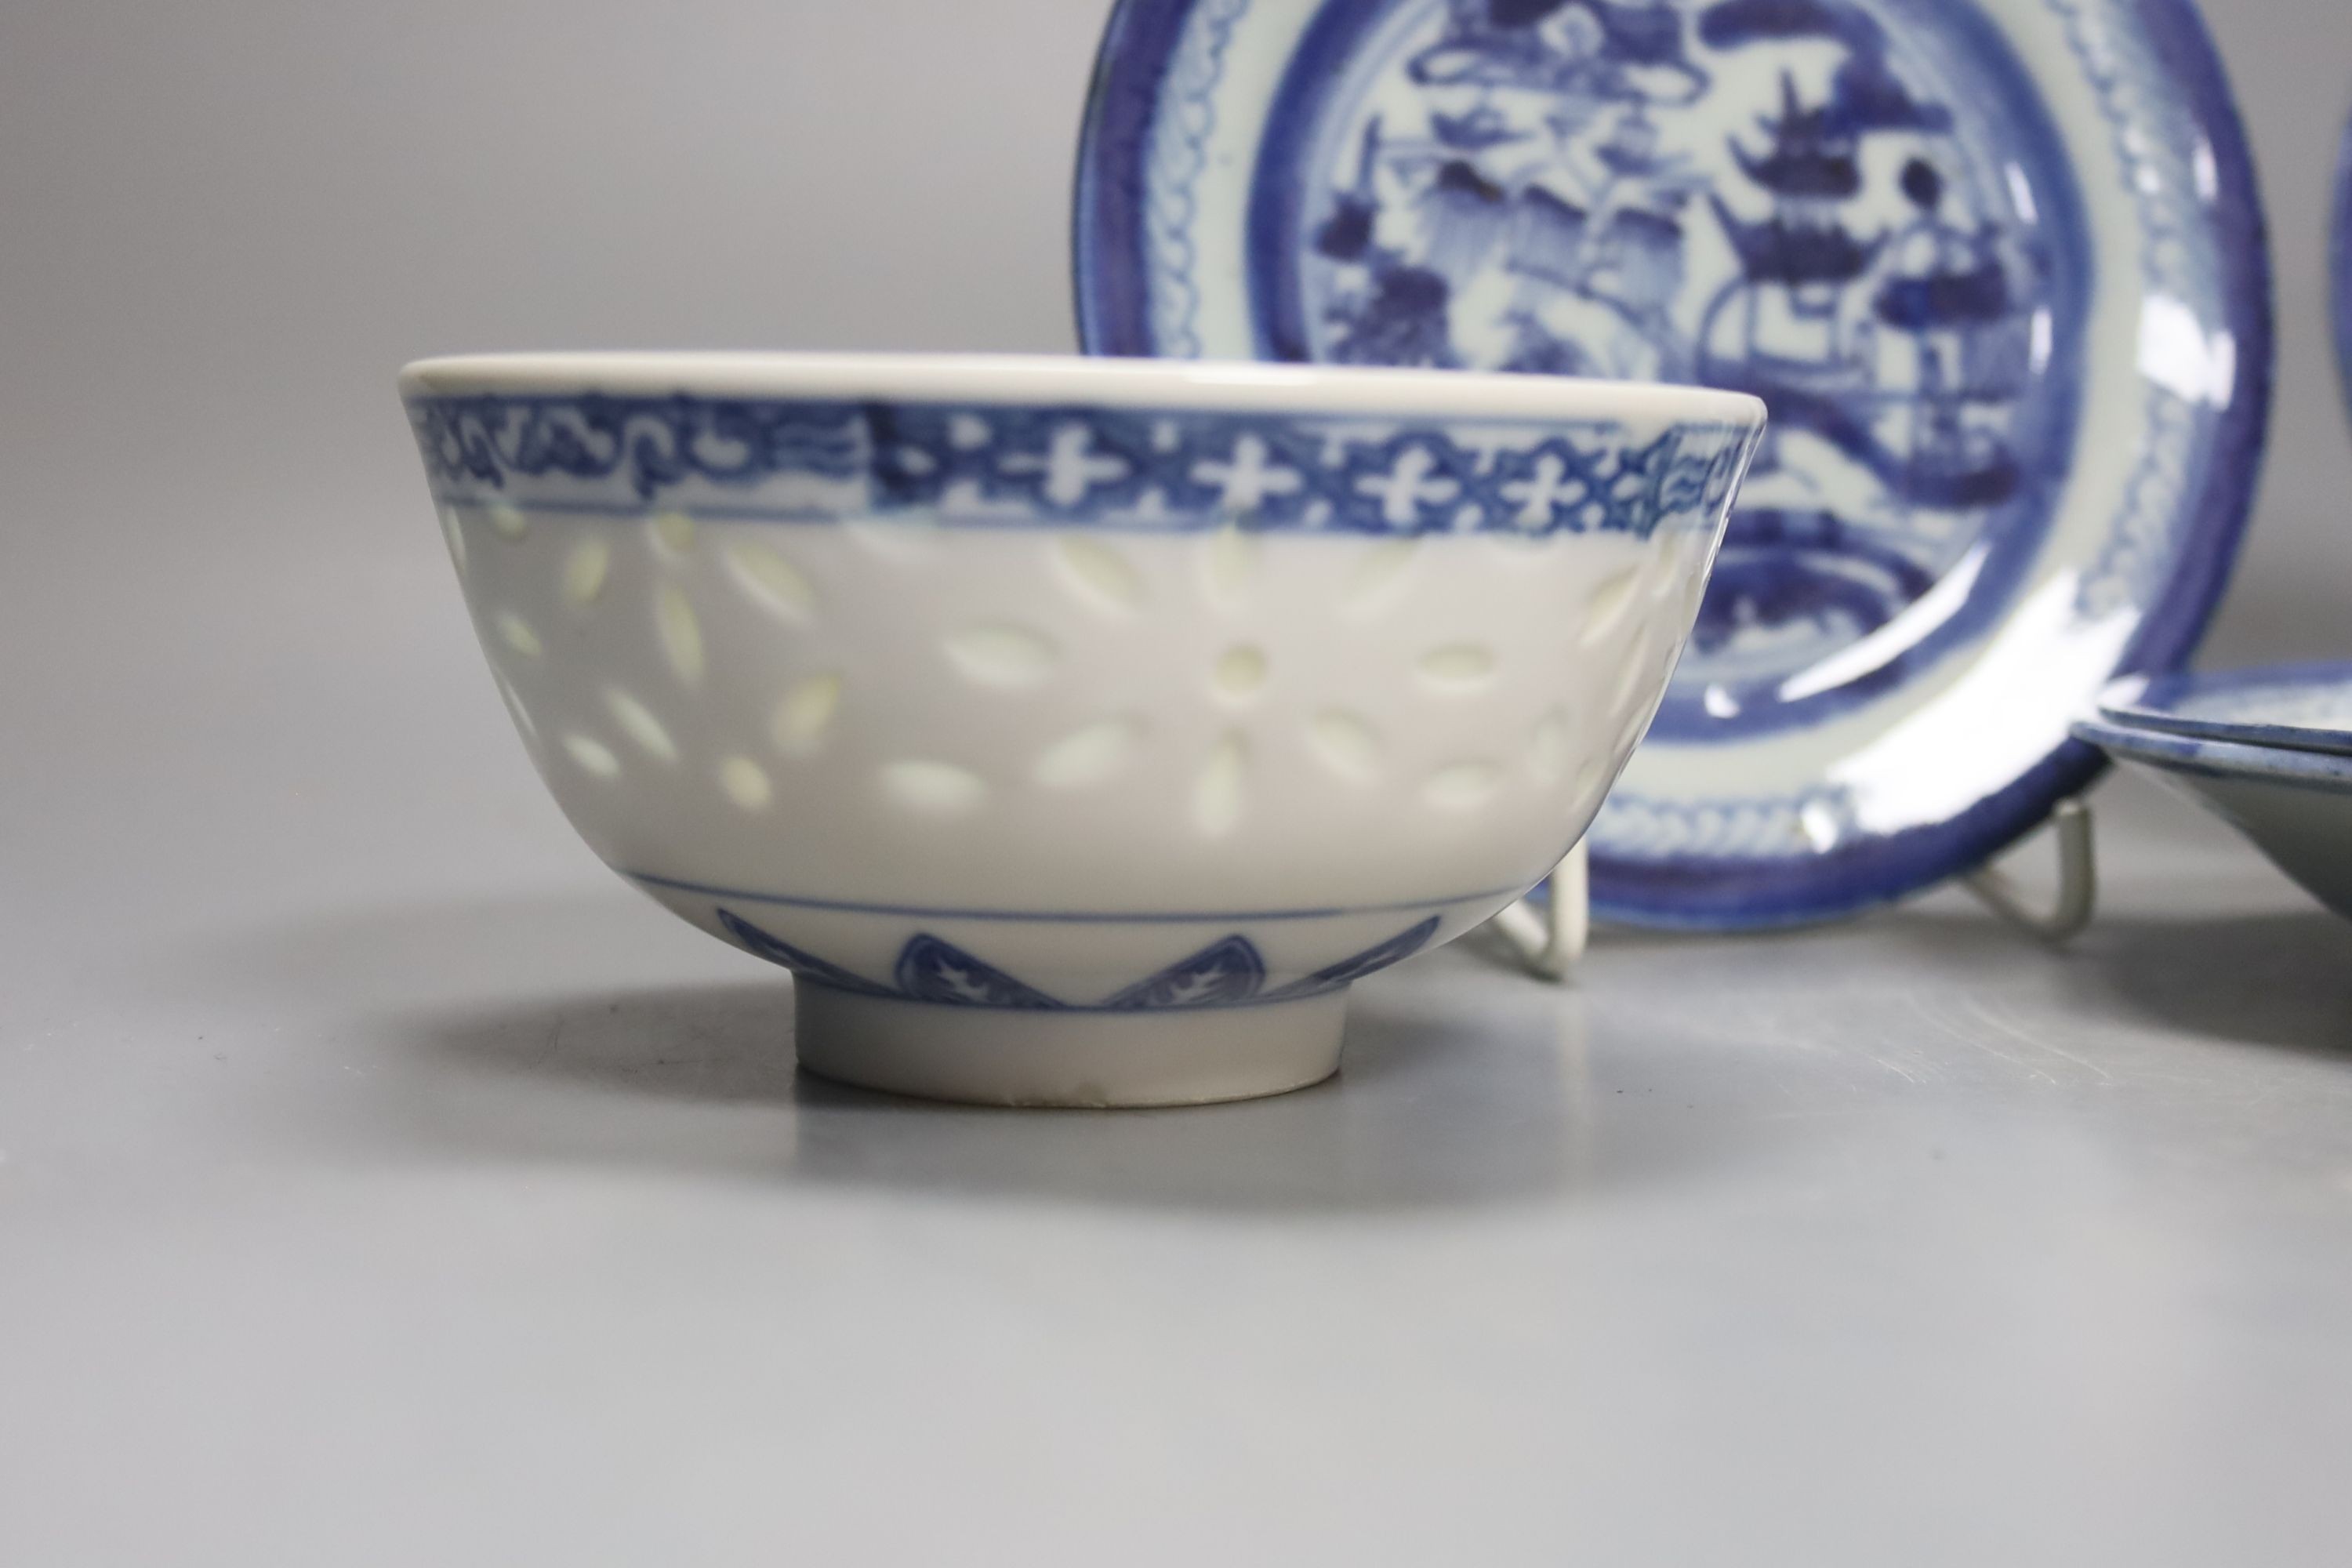 Four 19th century Chinese blue and white plates and two bowls, plates 15 cms diameter.